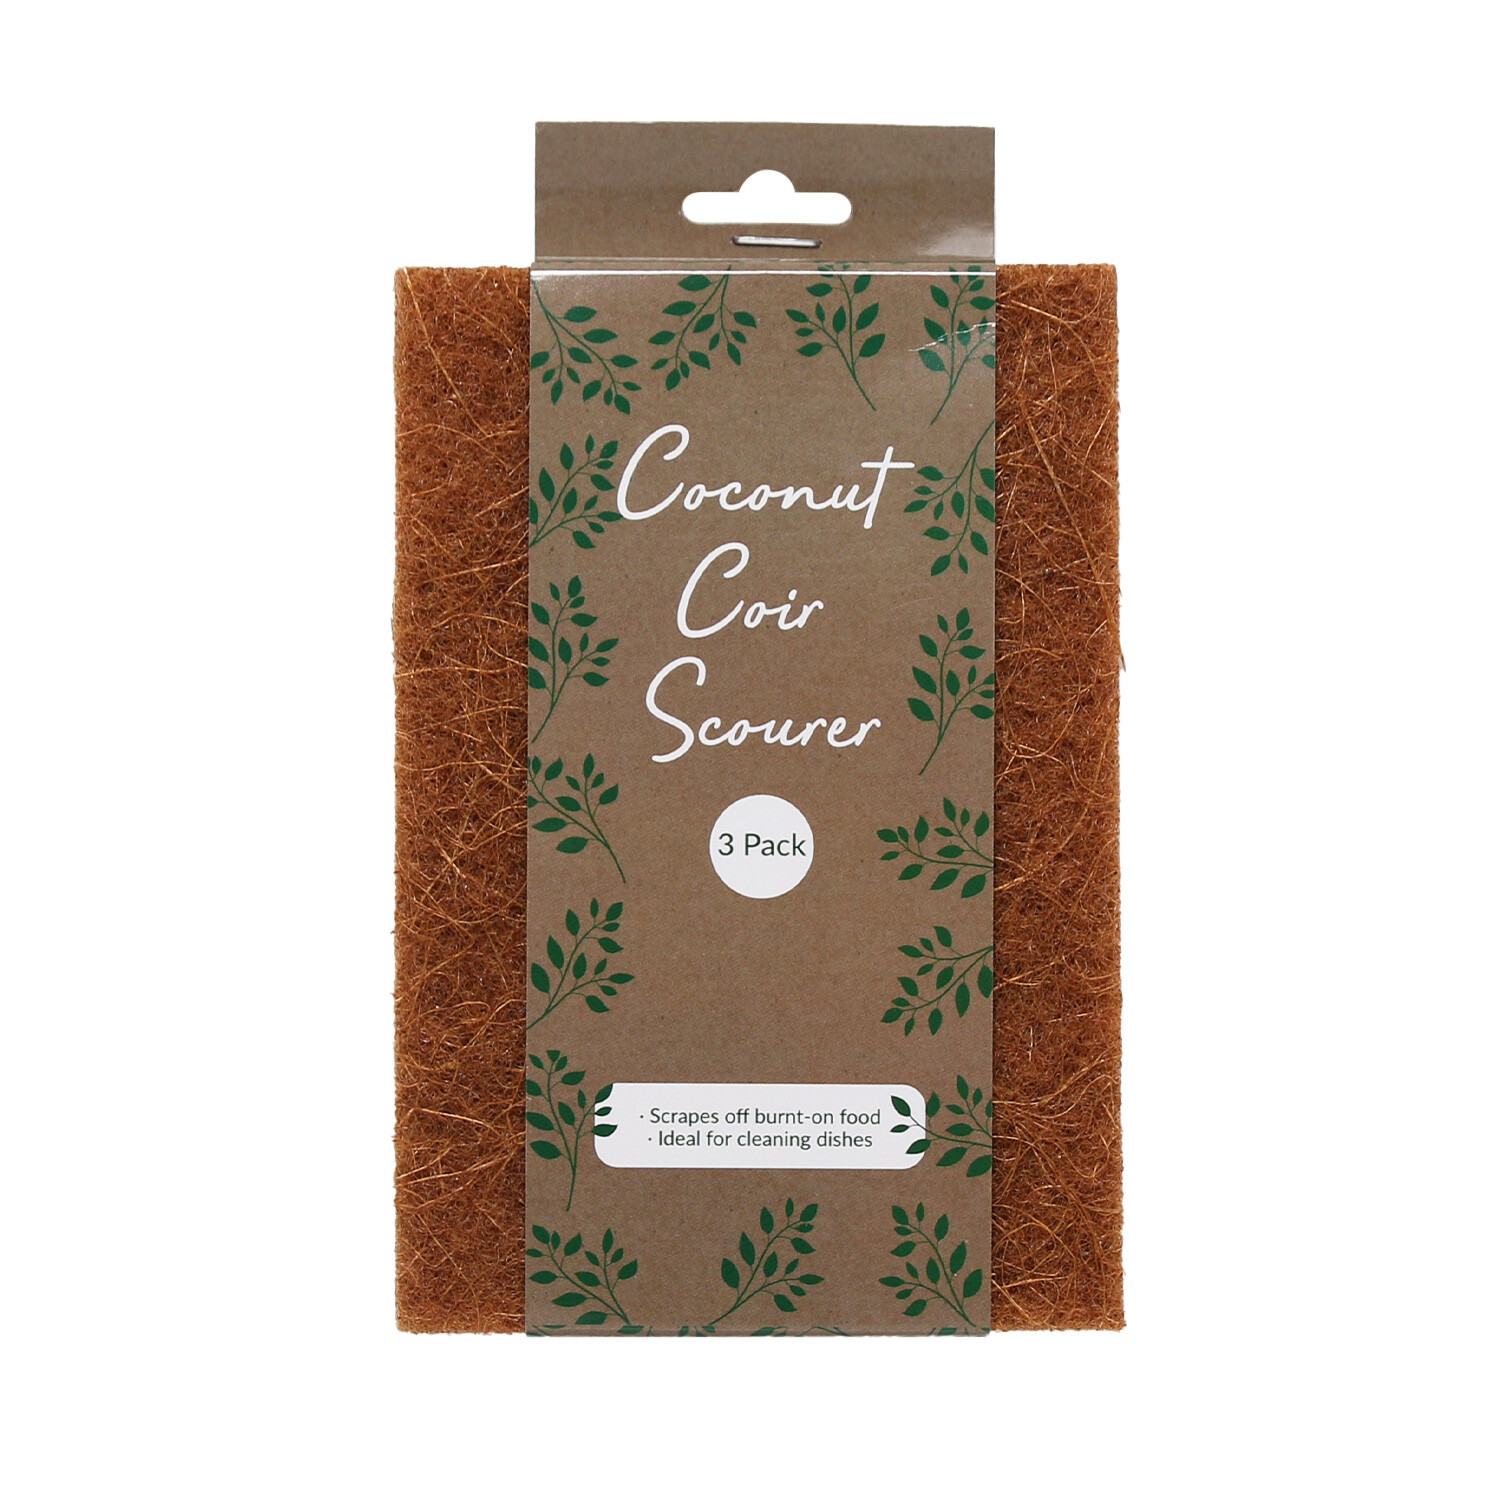 Pack of 3 Coconut Coir Scourers Image